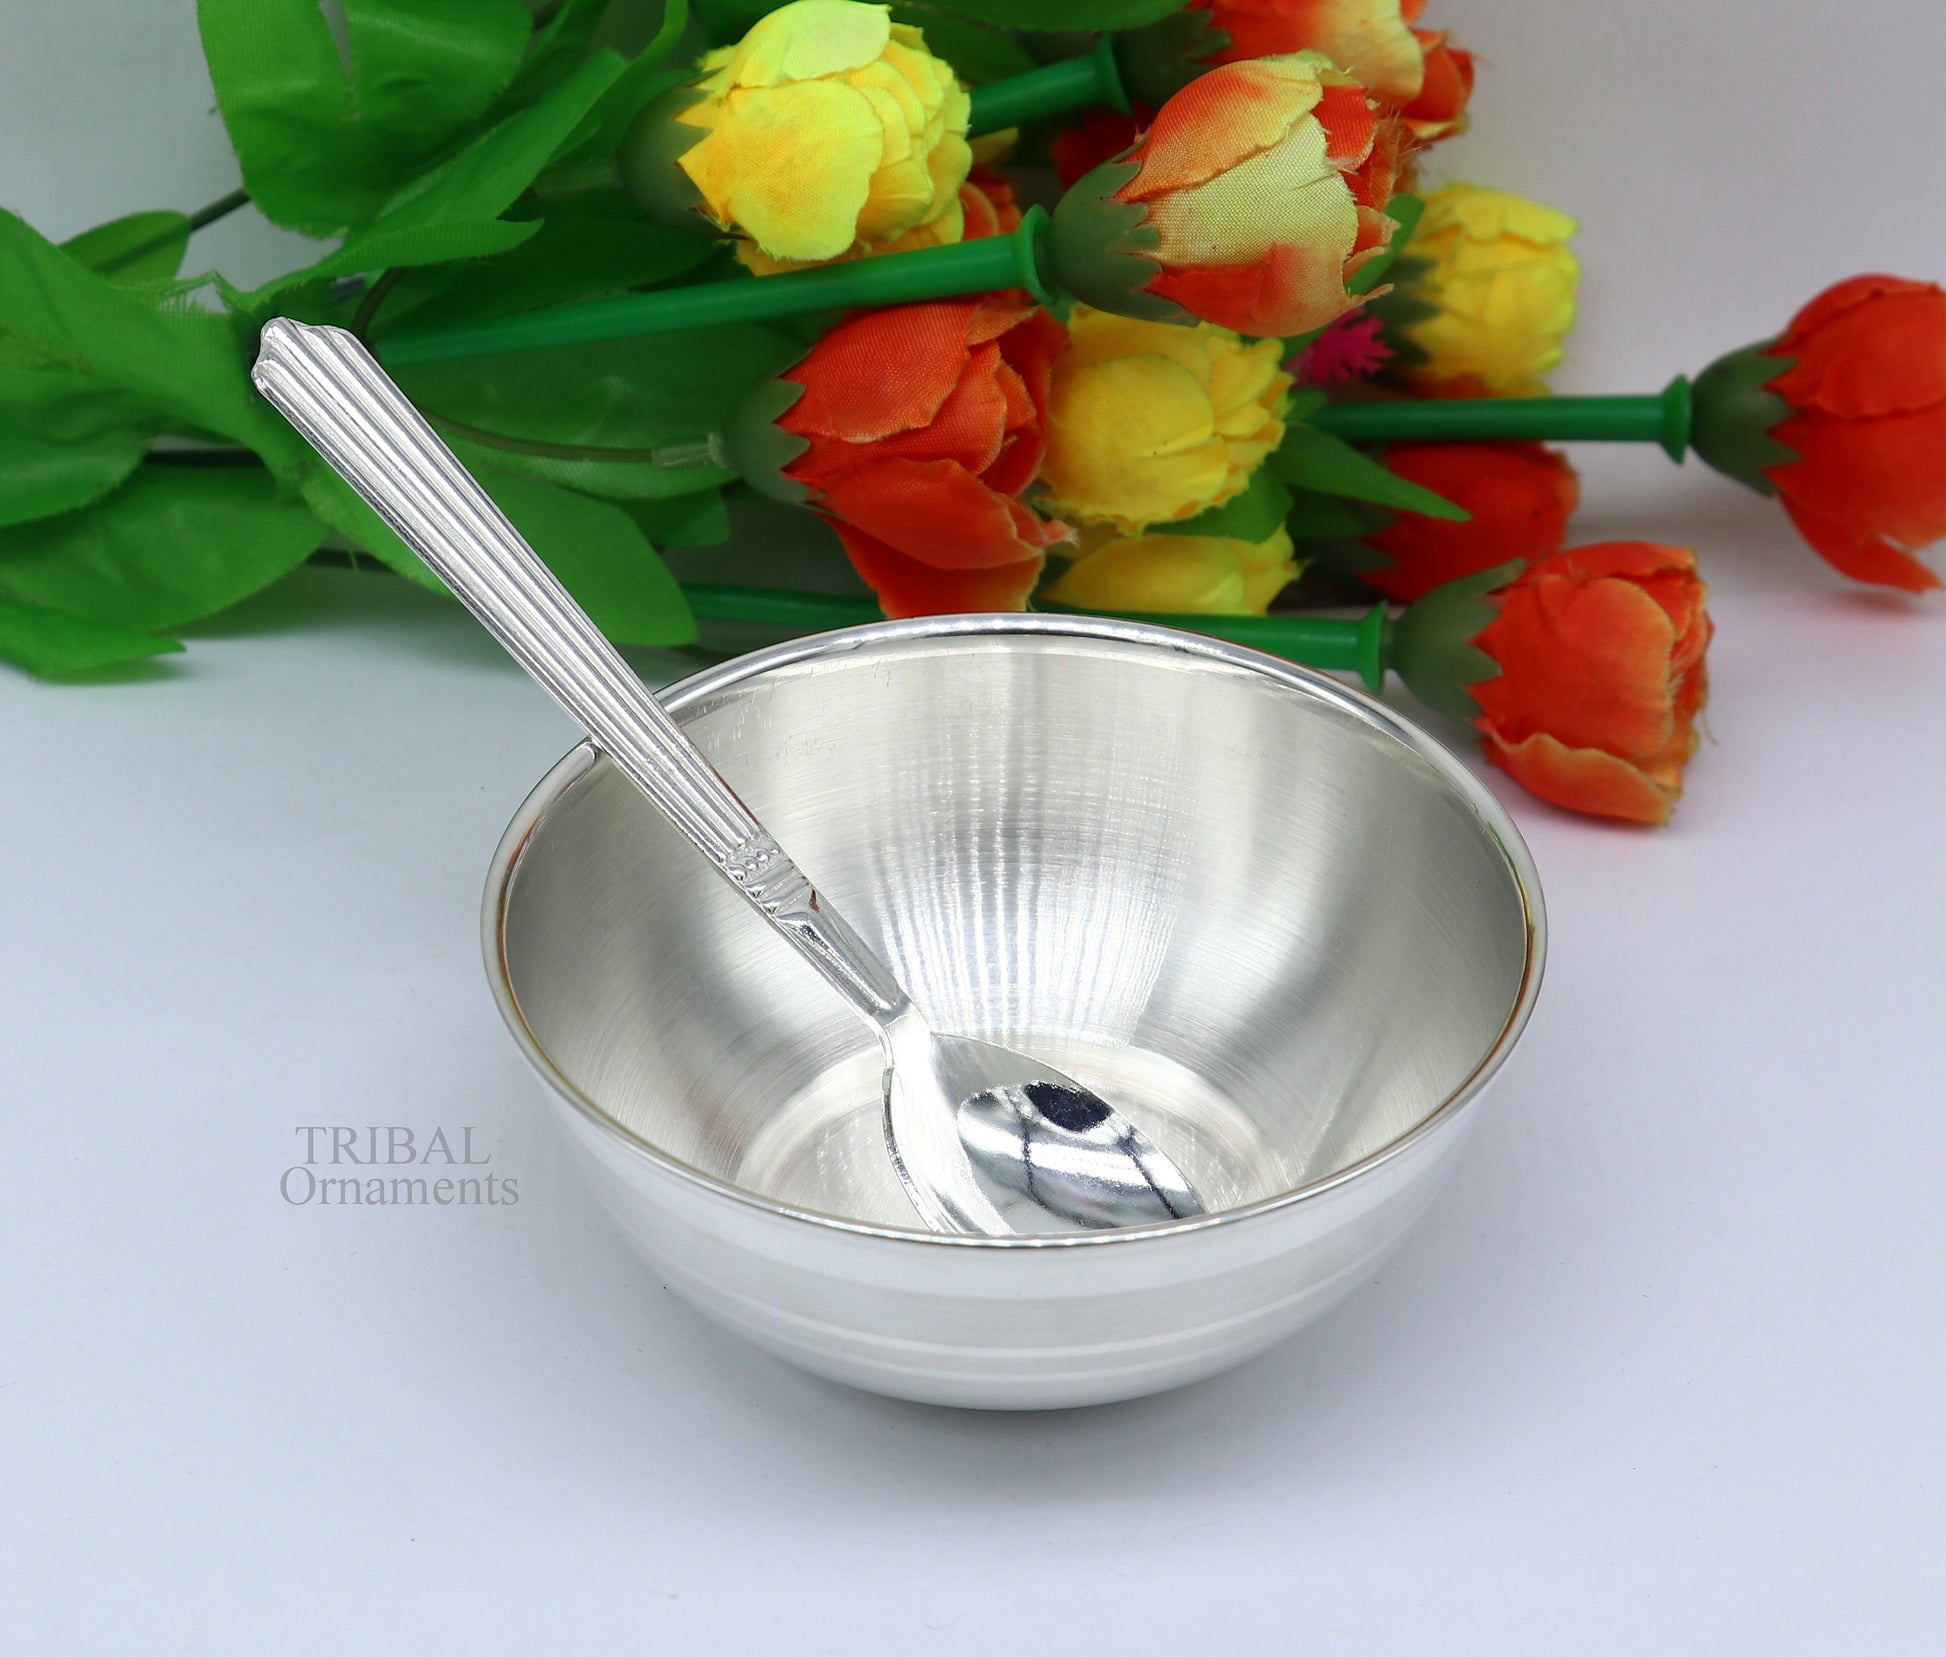 999 pure sterling silver handmade solid silver bowl and spoon, healthy serving bowl, silver vessels, baby serving utensils baby set sv261 - TRIBAL ORNAMENTS